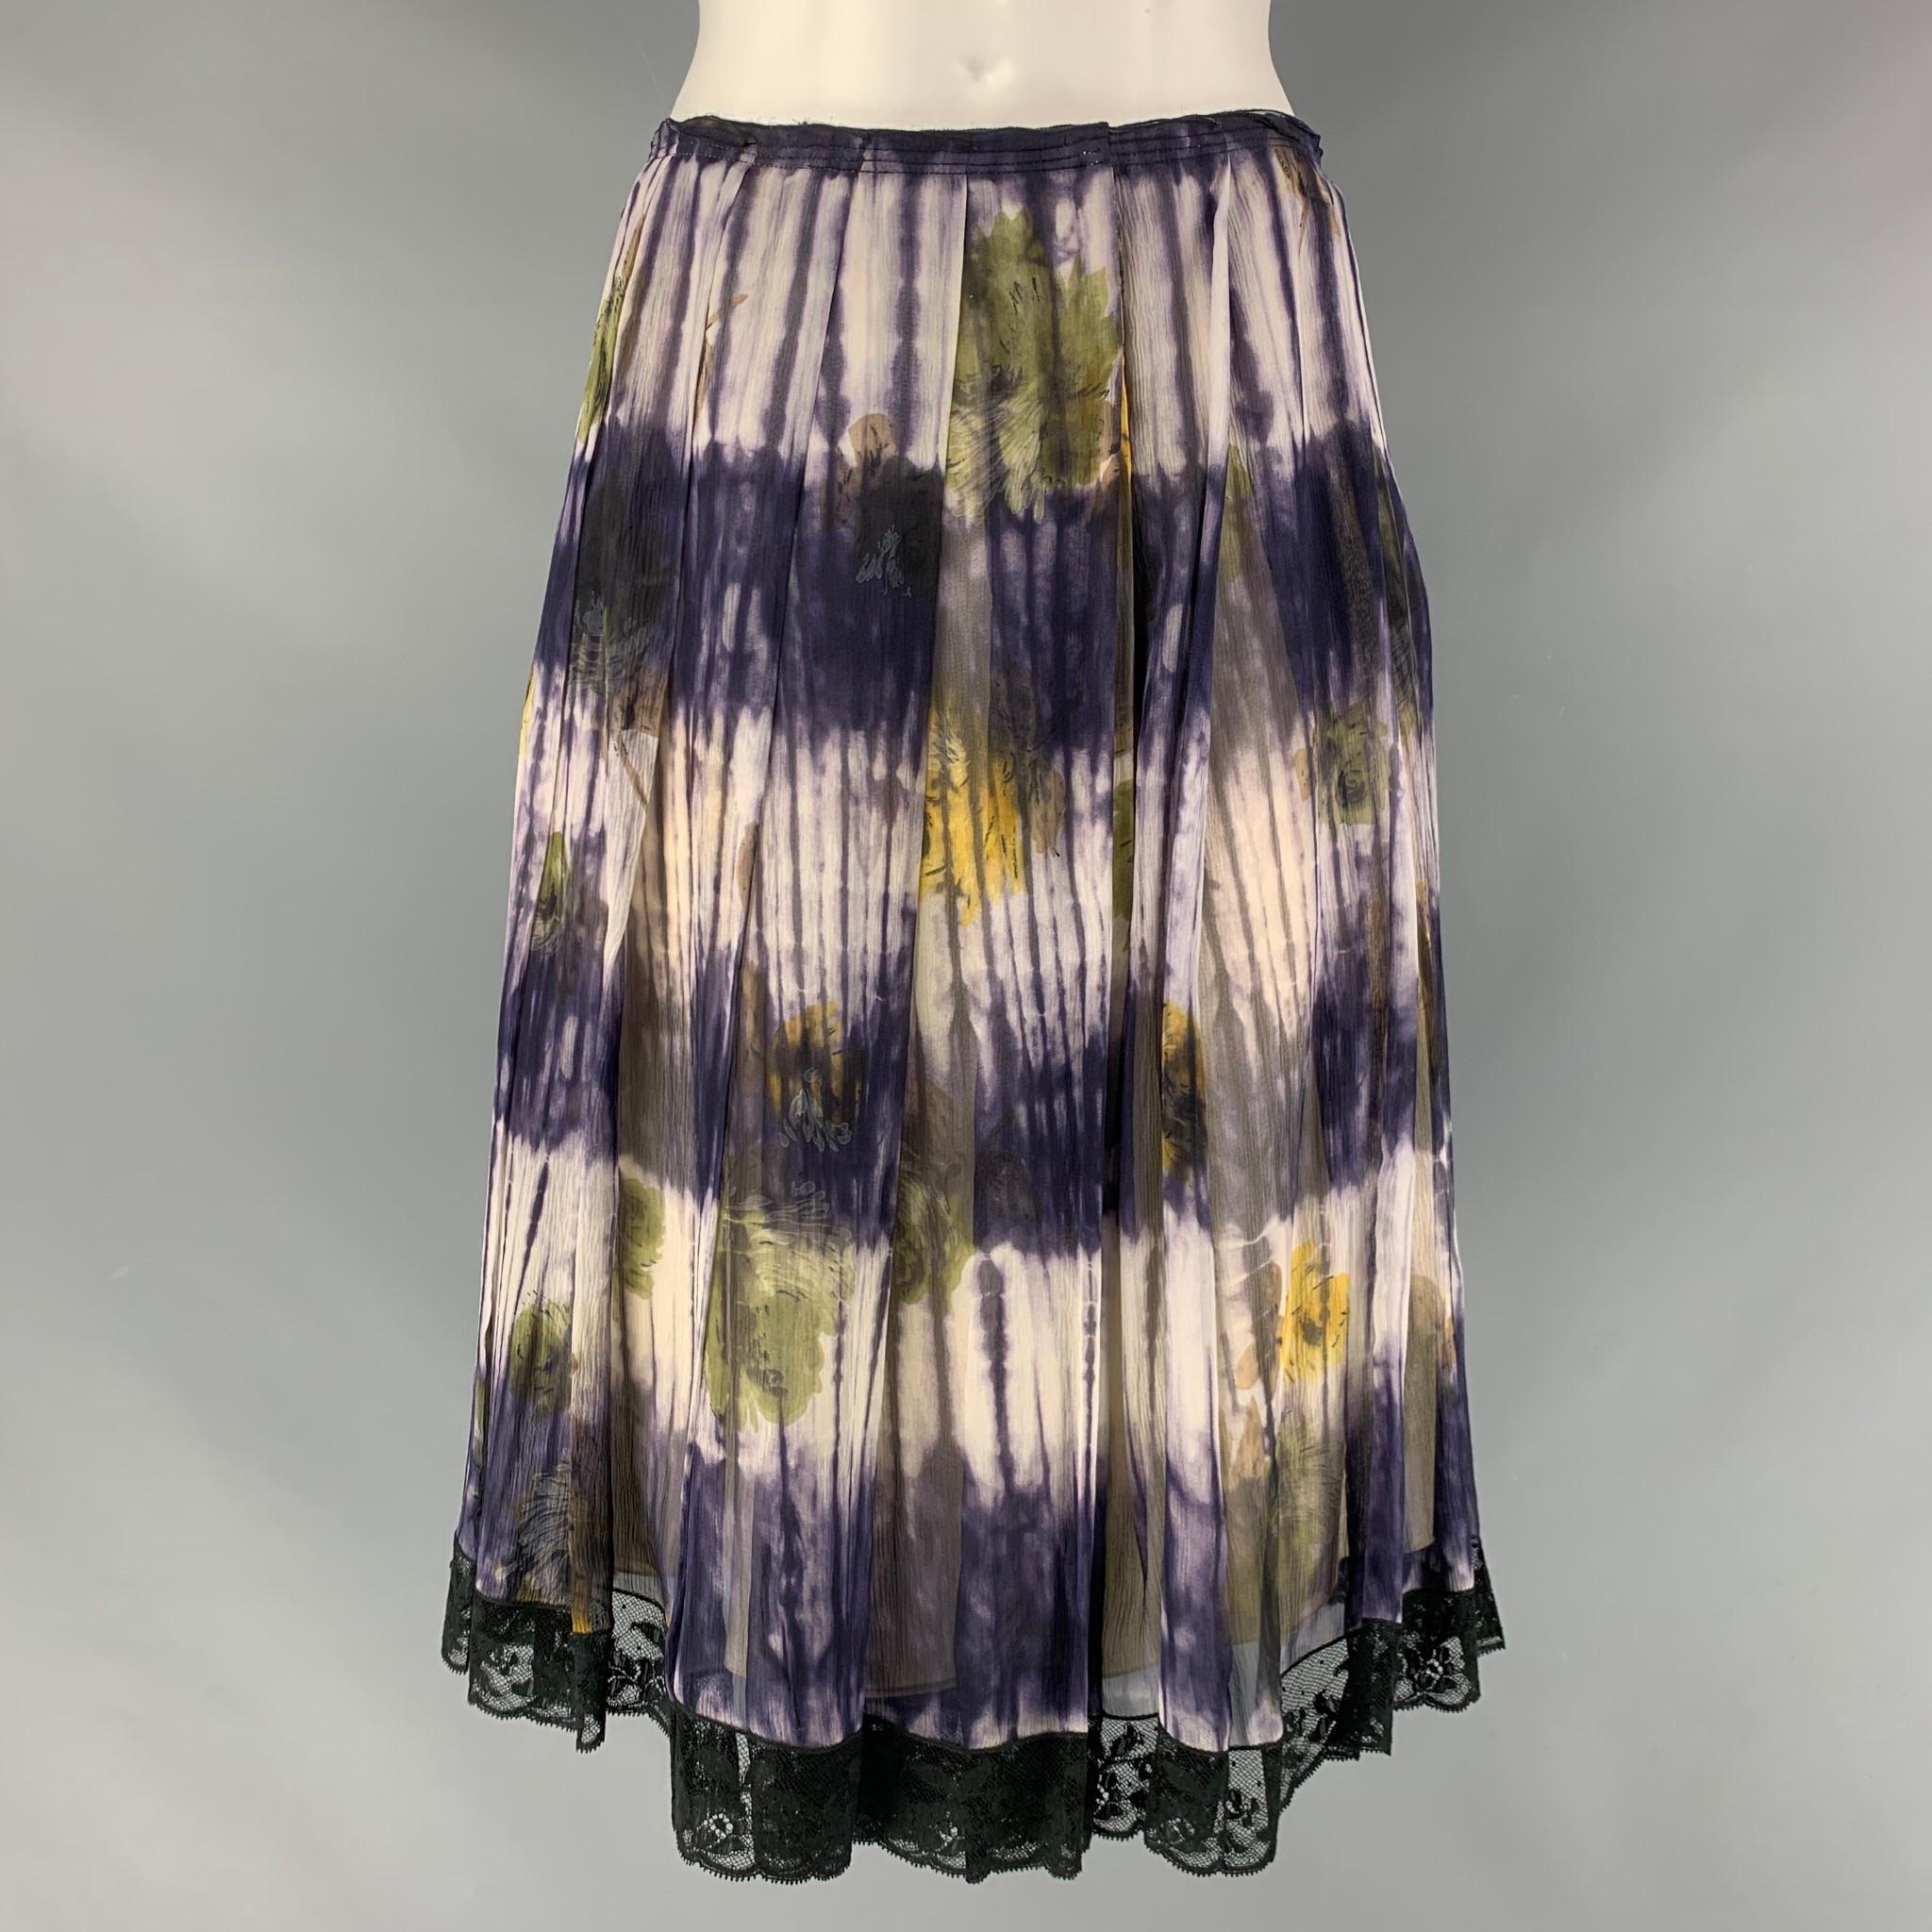 PRADA pleated skirt comes in a cream and purple floral silk featuring a black lace trim and a side snap button closure. Made in Italy.

Excellent Pre-Owned Condition.
Marked: 40

Measurements:

Waist: 27 in.
Hip: 37 in.
Length: 23.5 in.  

 